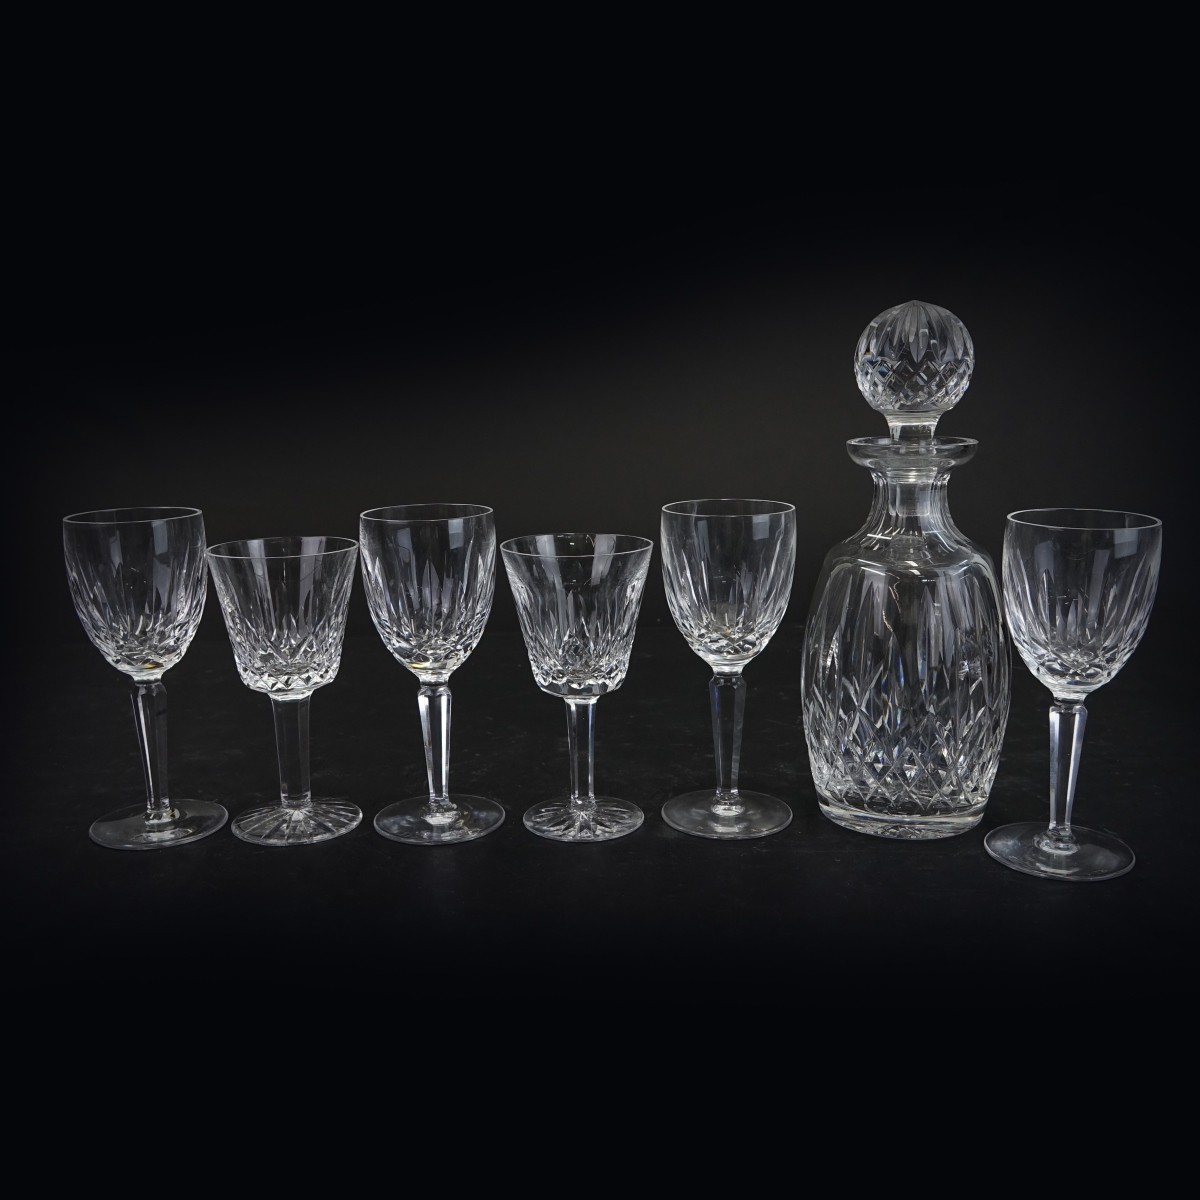 8 pcs Waterford Lismore Decanter and Glasses